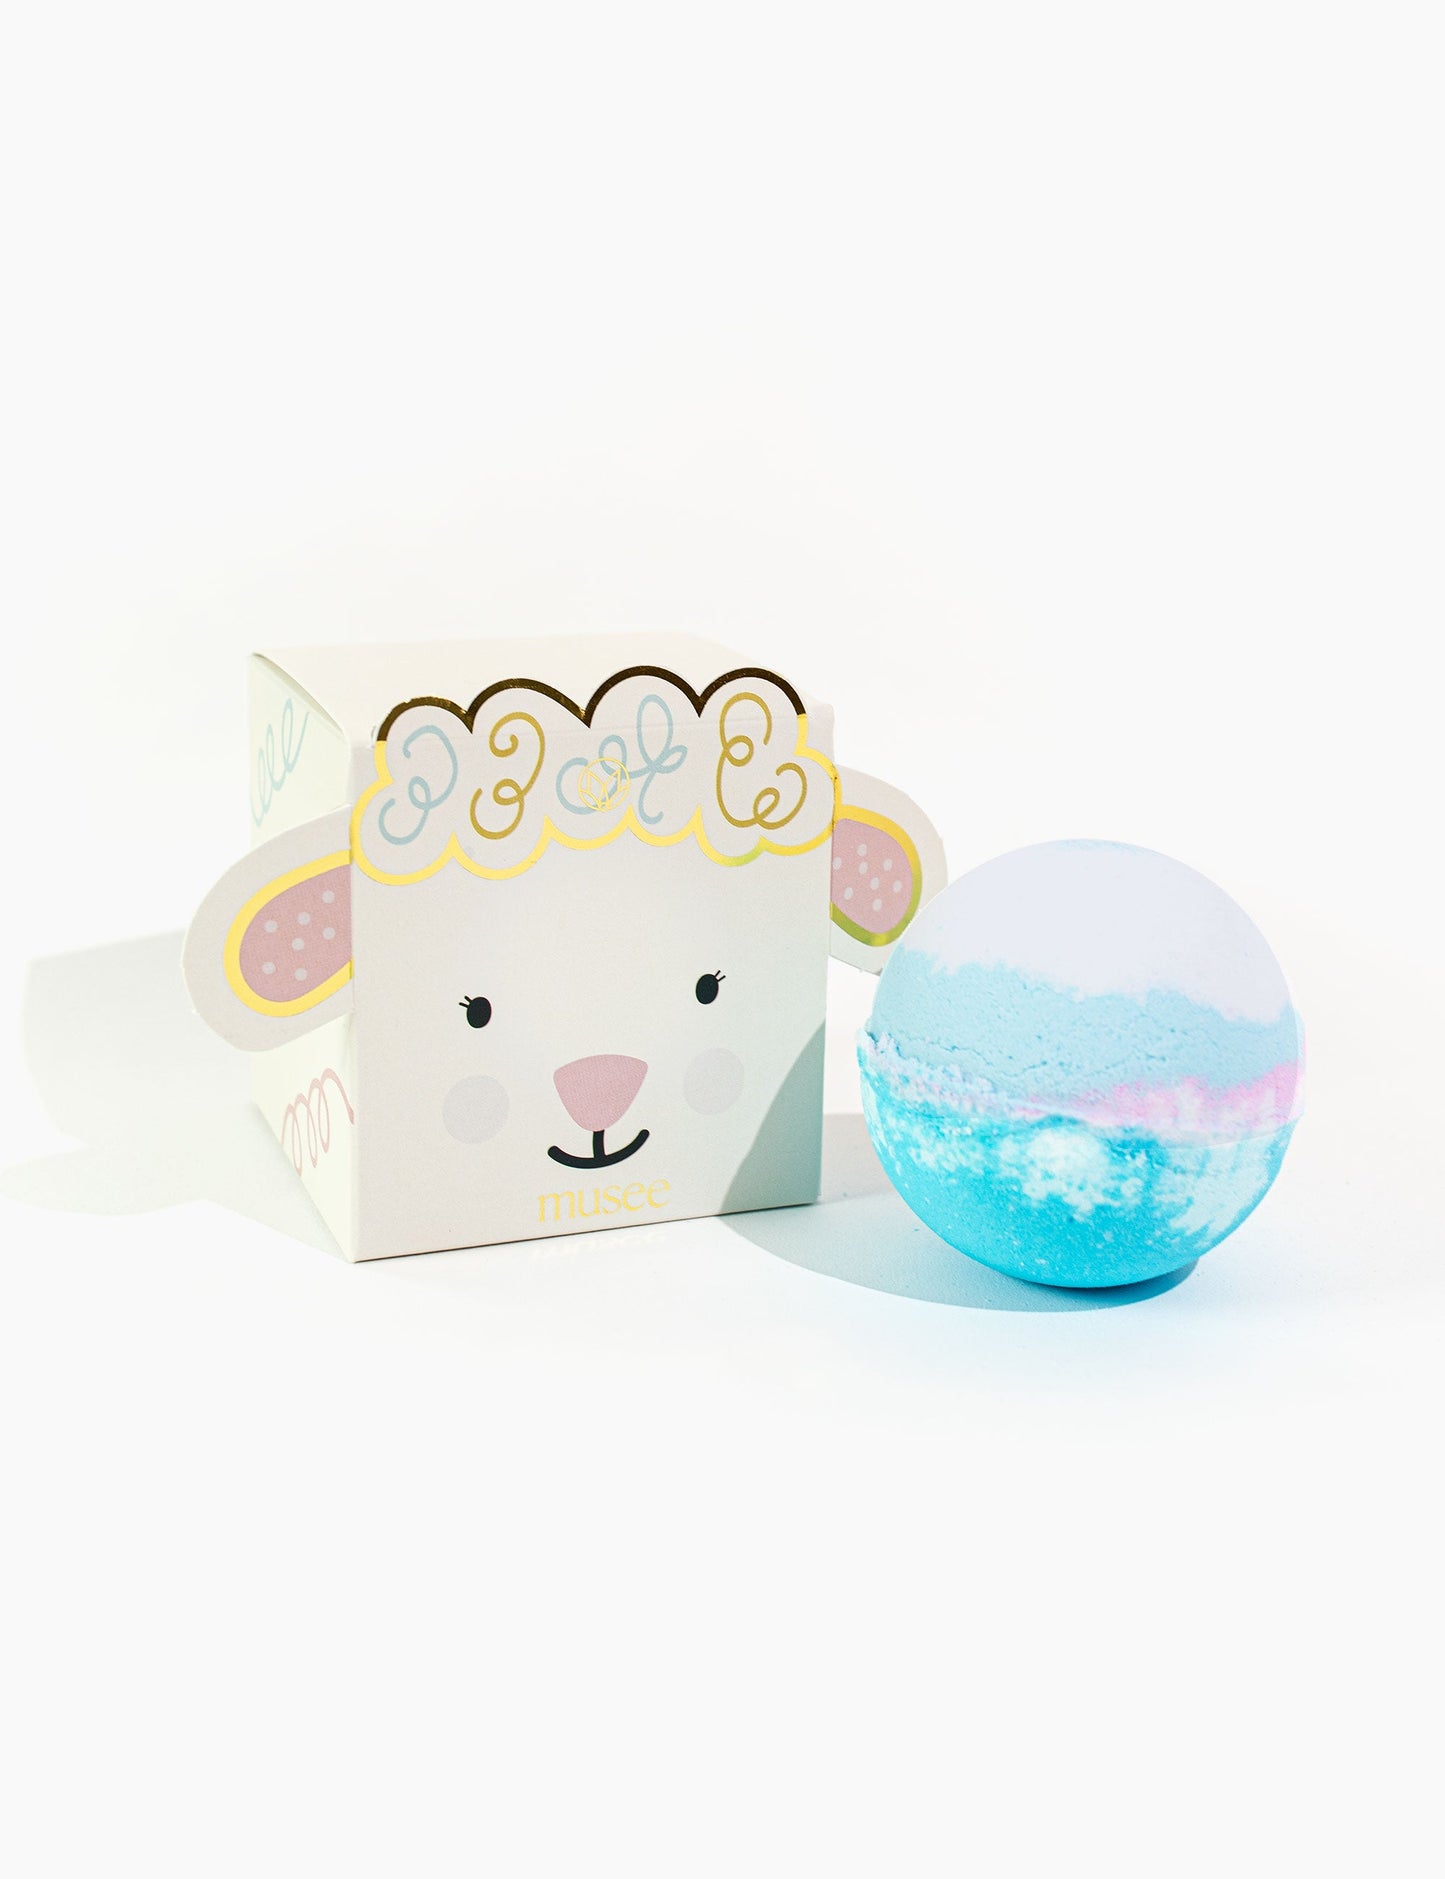 Musee Boxed Bath Balm Bath & Body in Little Lamb at Wrapsody